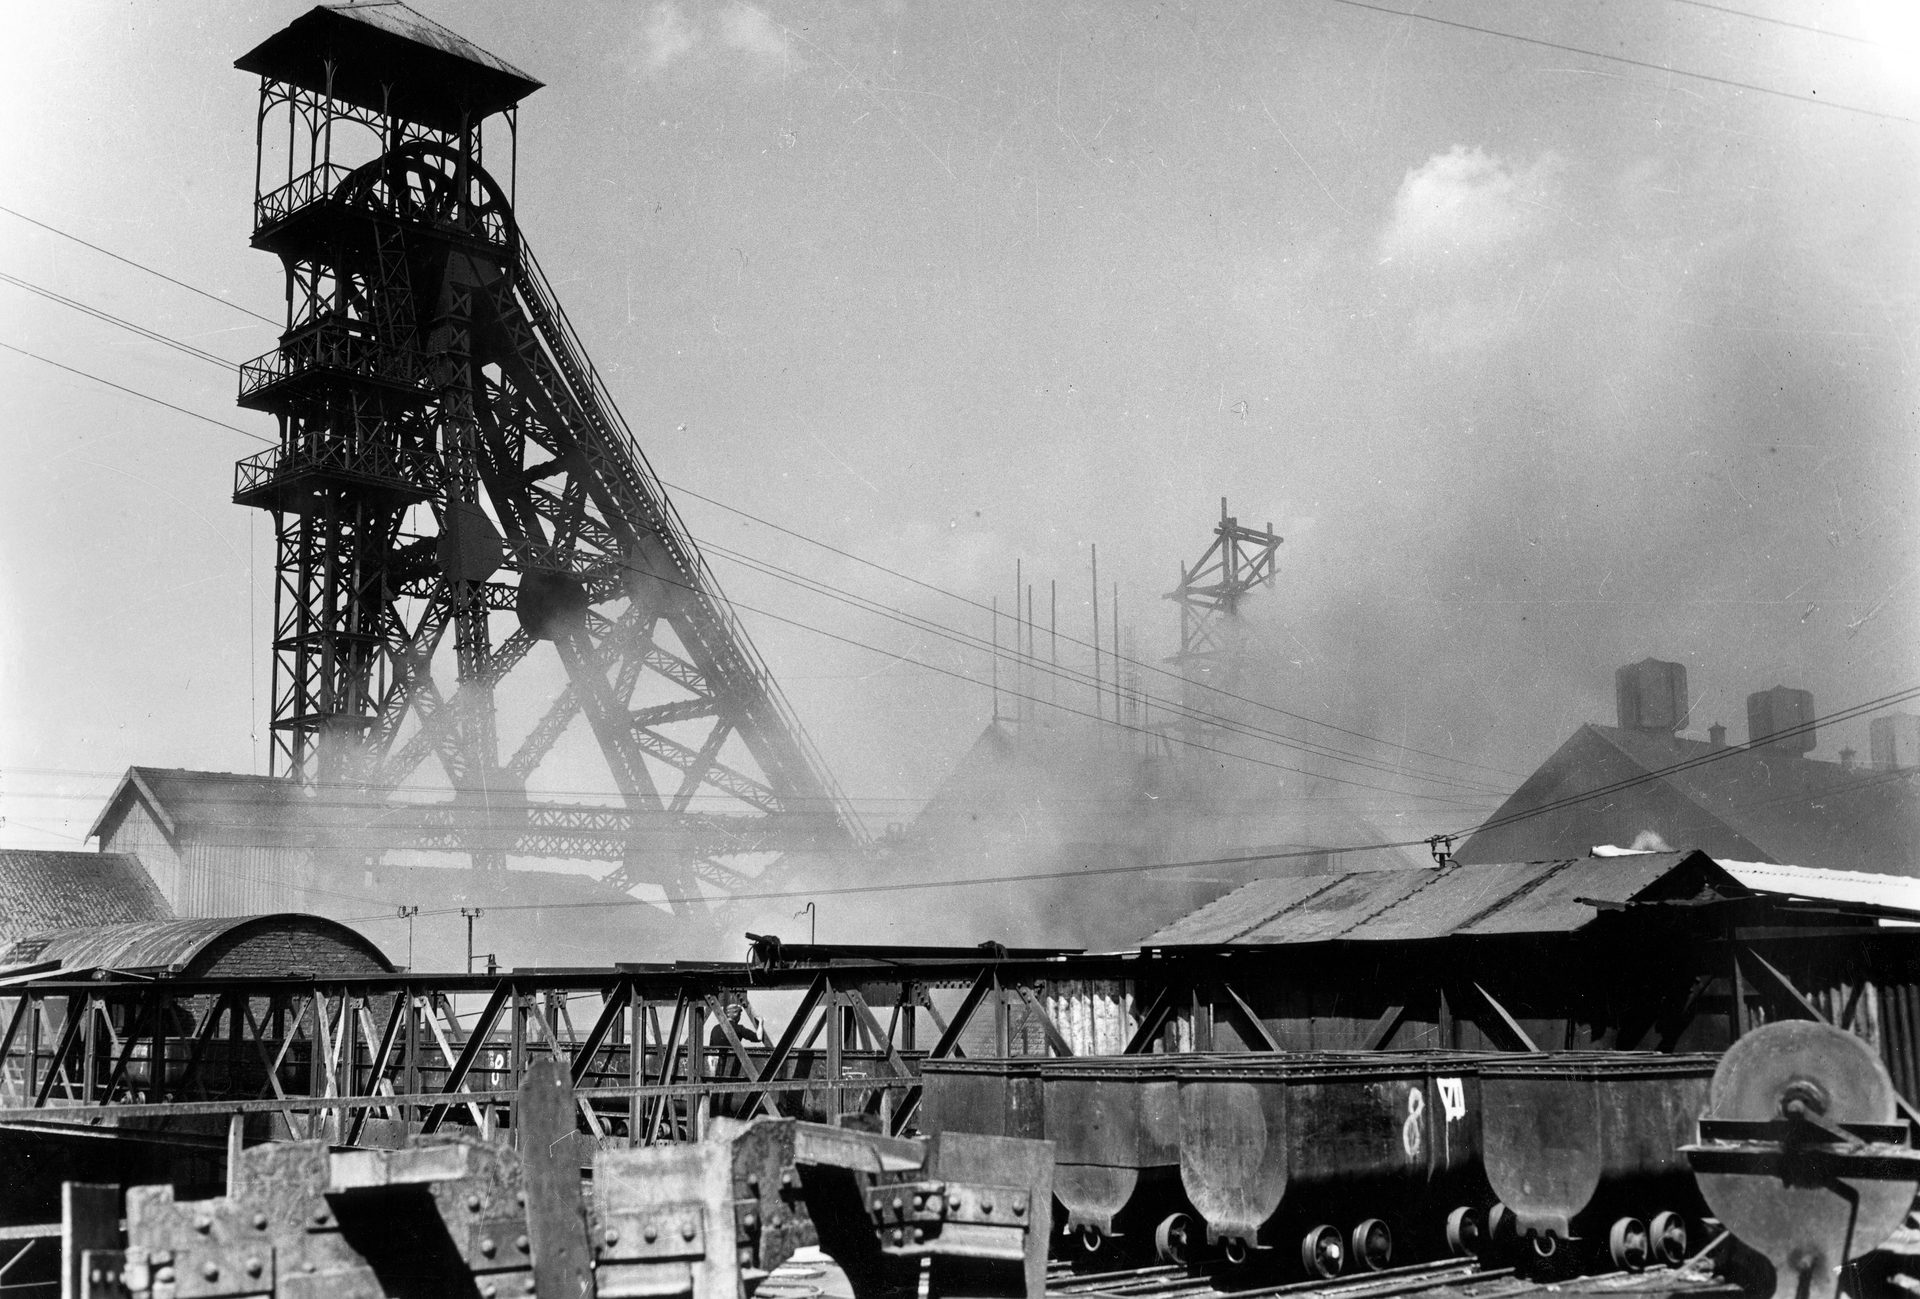 Today in History: Nearly 300 miners killed in the Marcinelle coal mine disaster